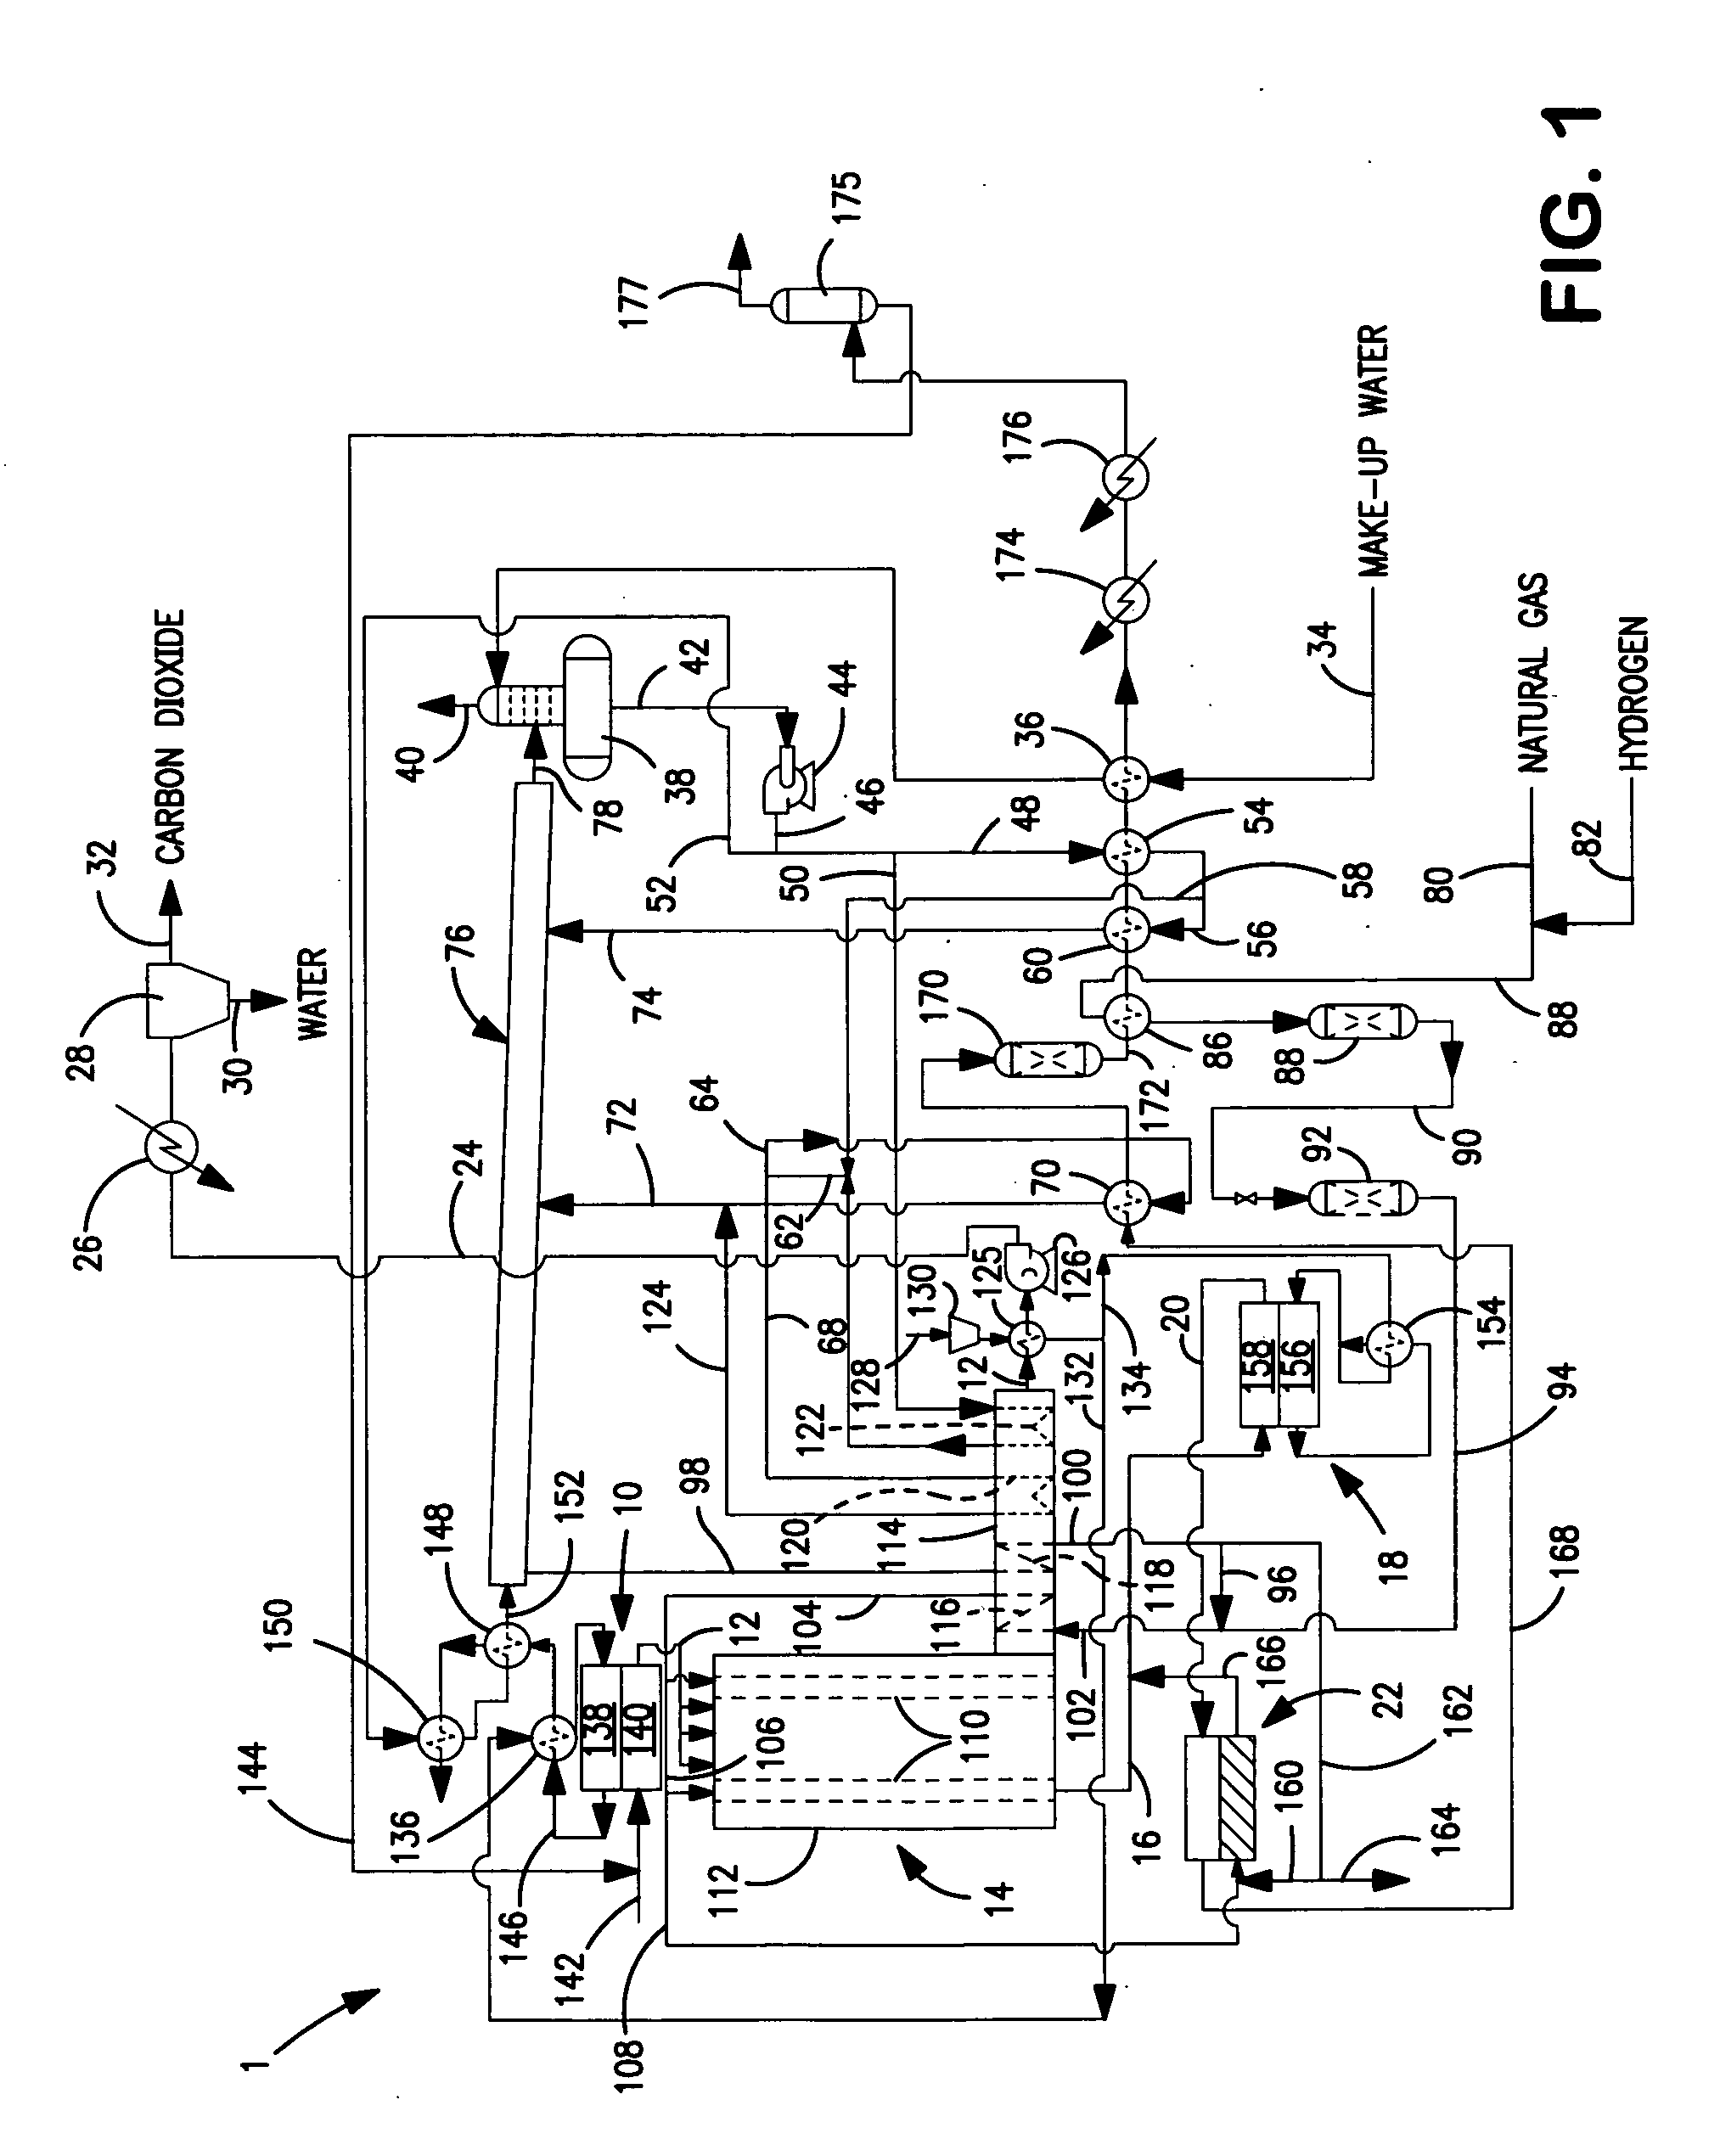 Synthesis gas and carbon dioxide generation method